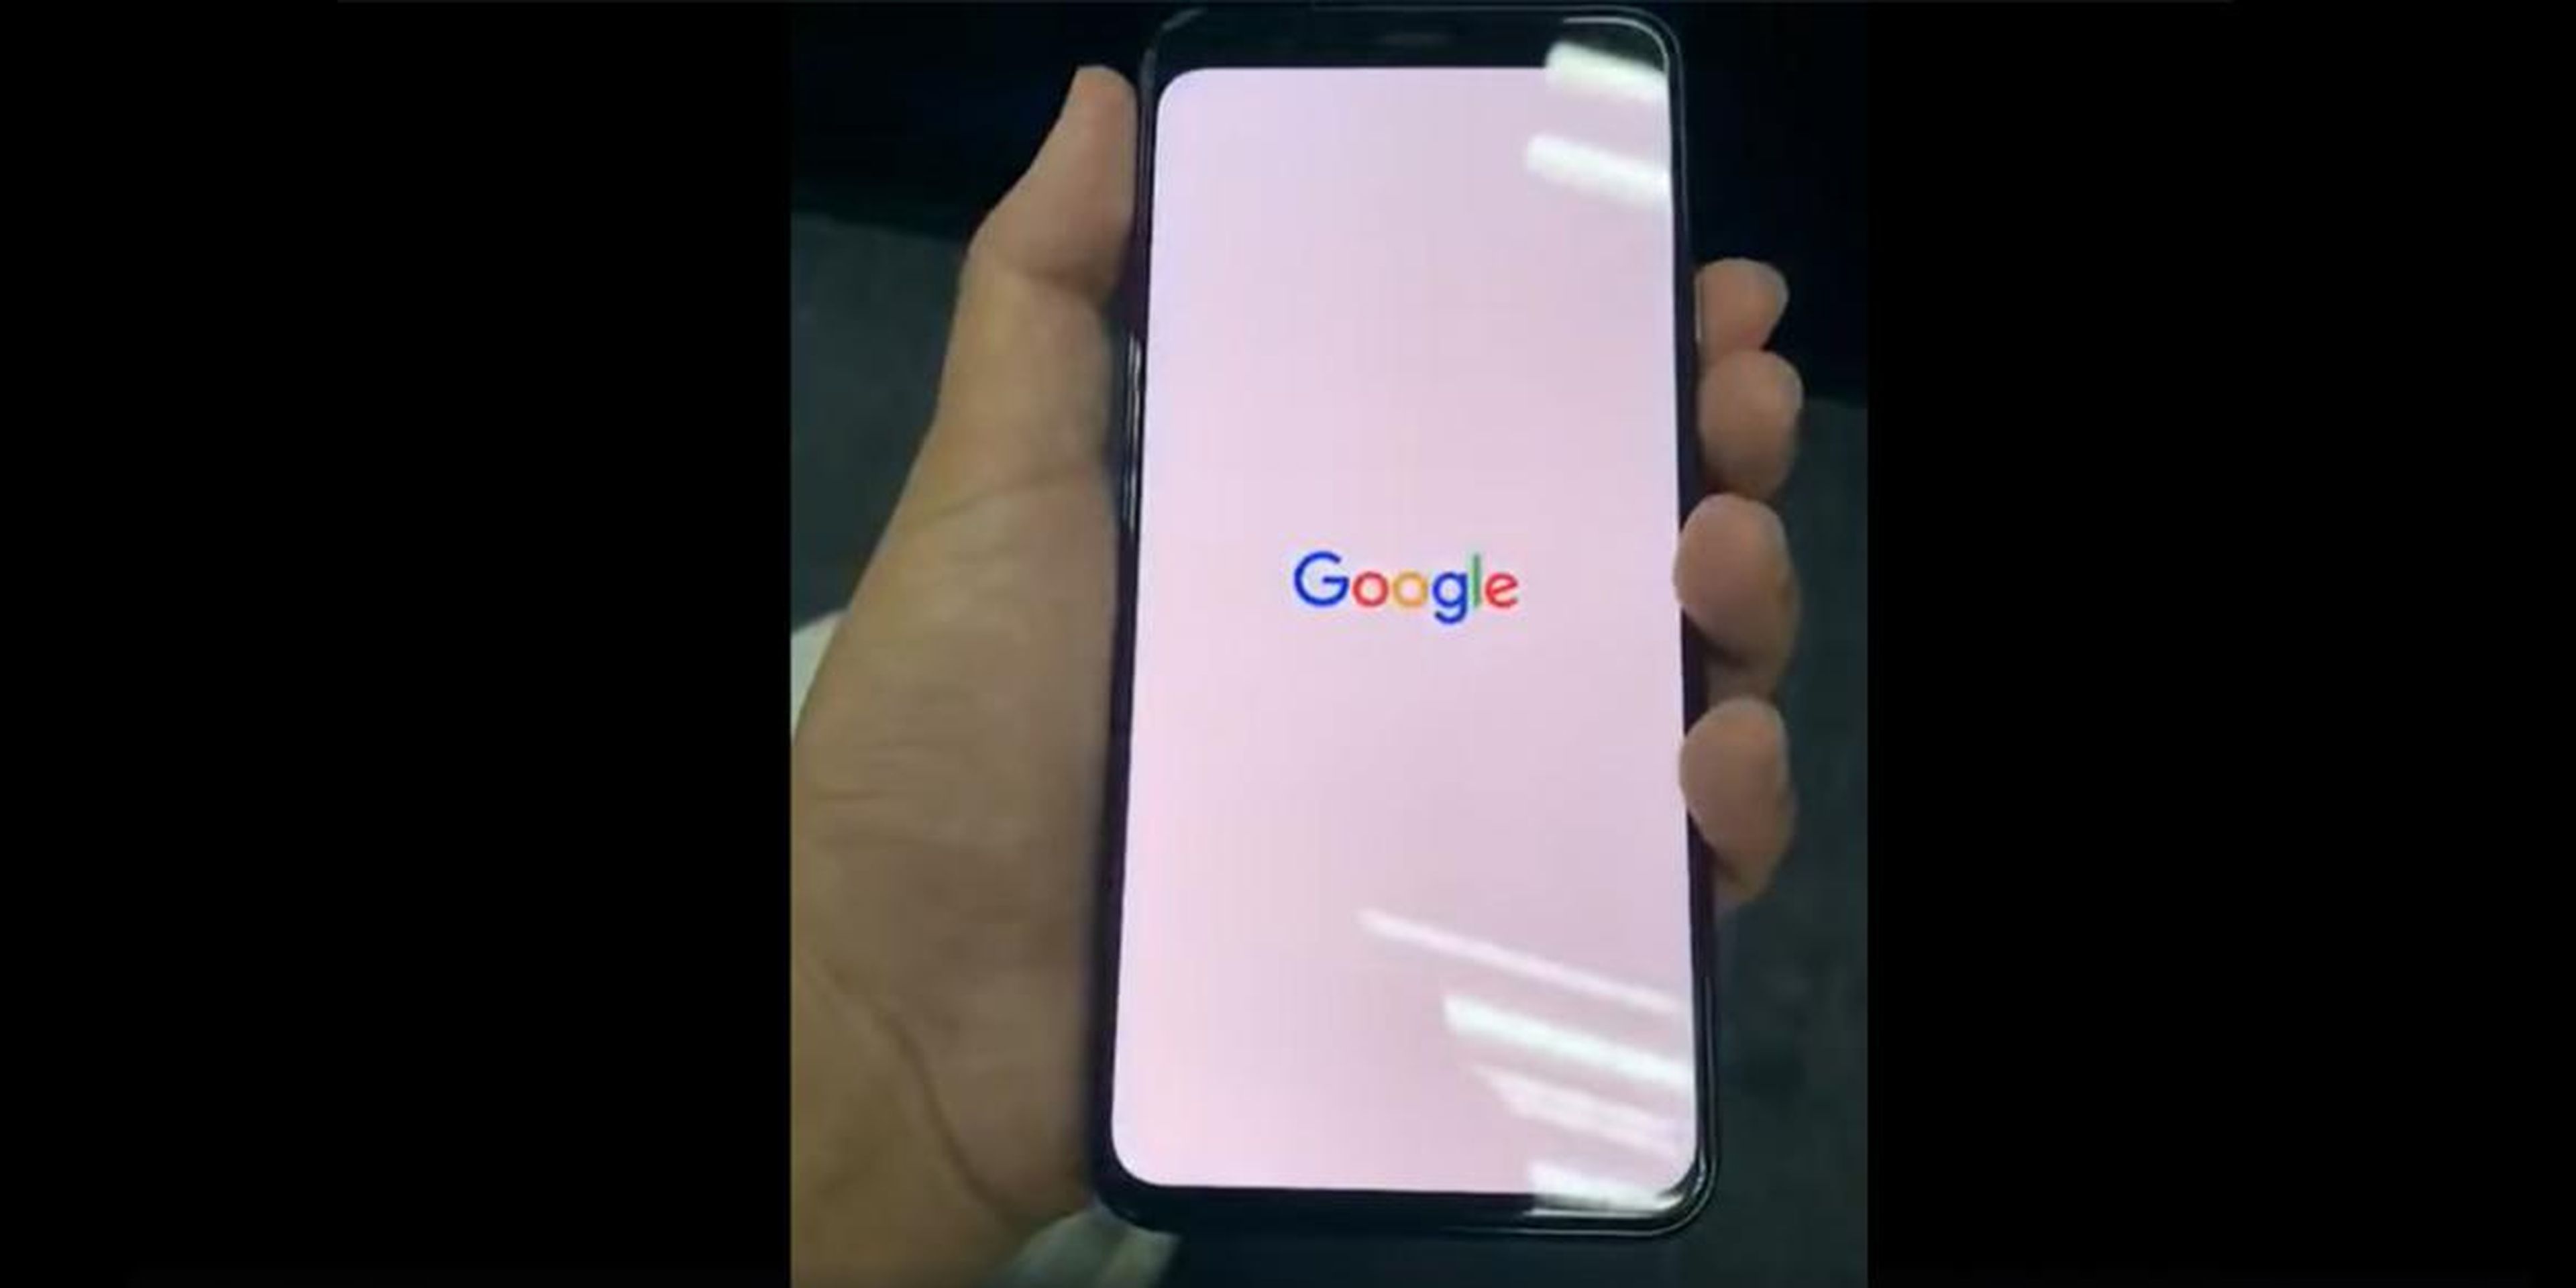 A new video leak supposedly reveals the design of Google's new Pixel 4 phone from every angle